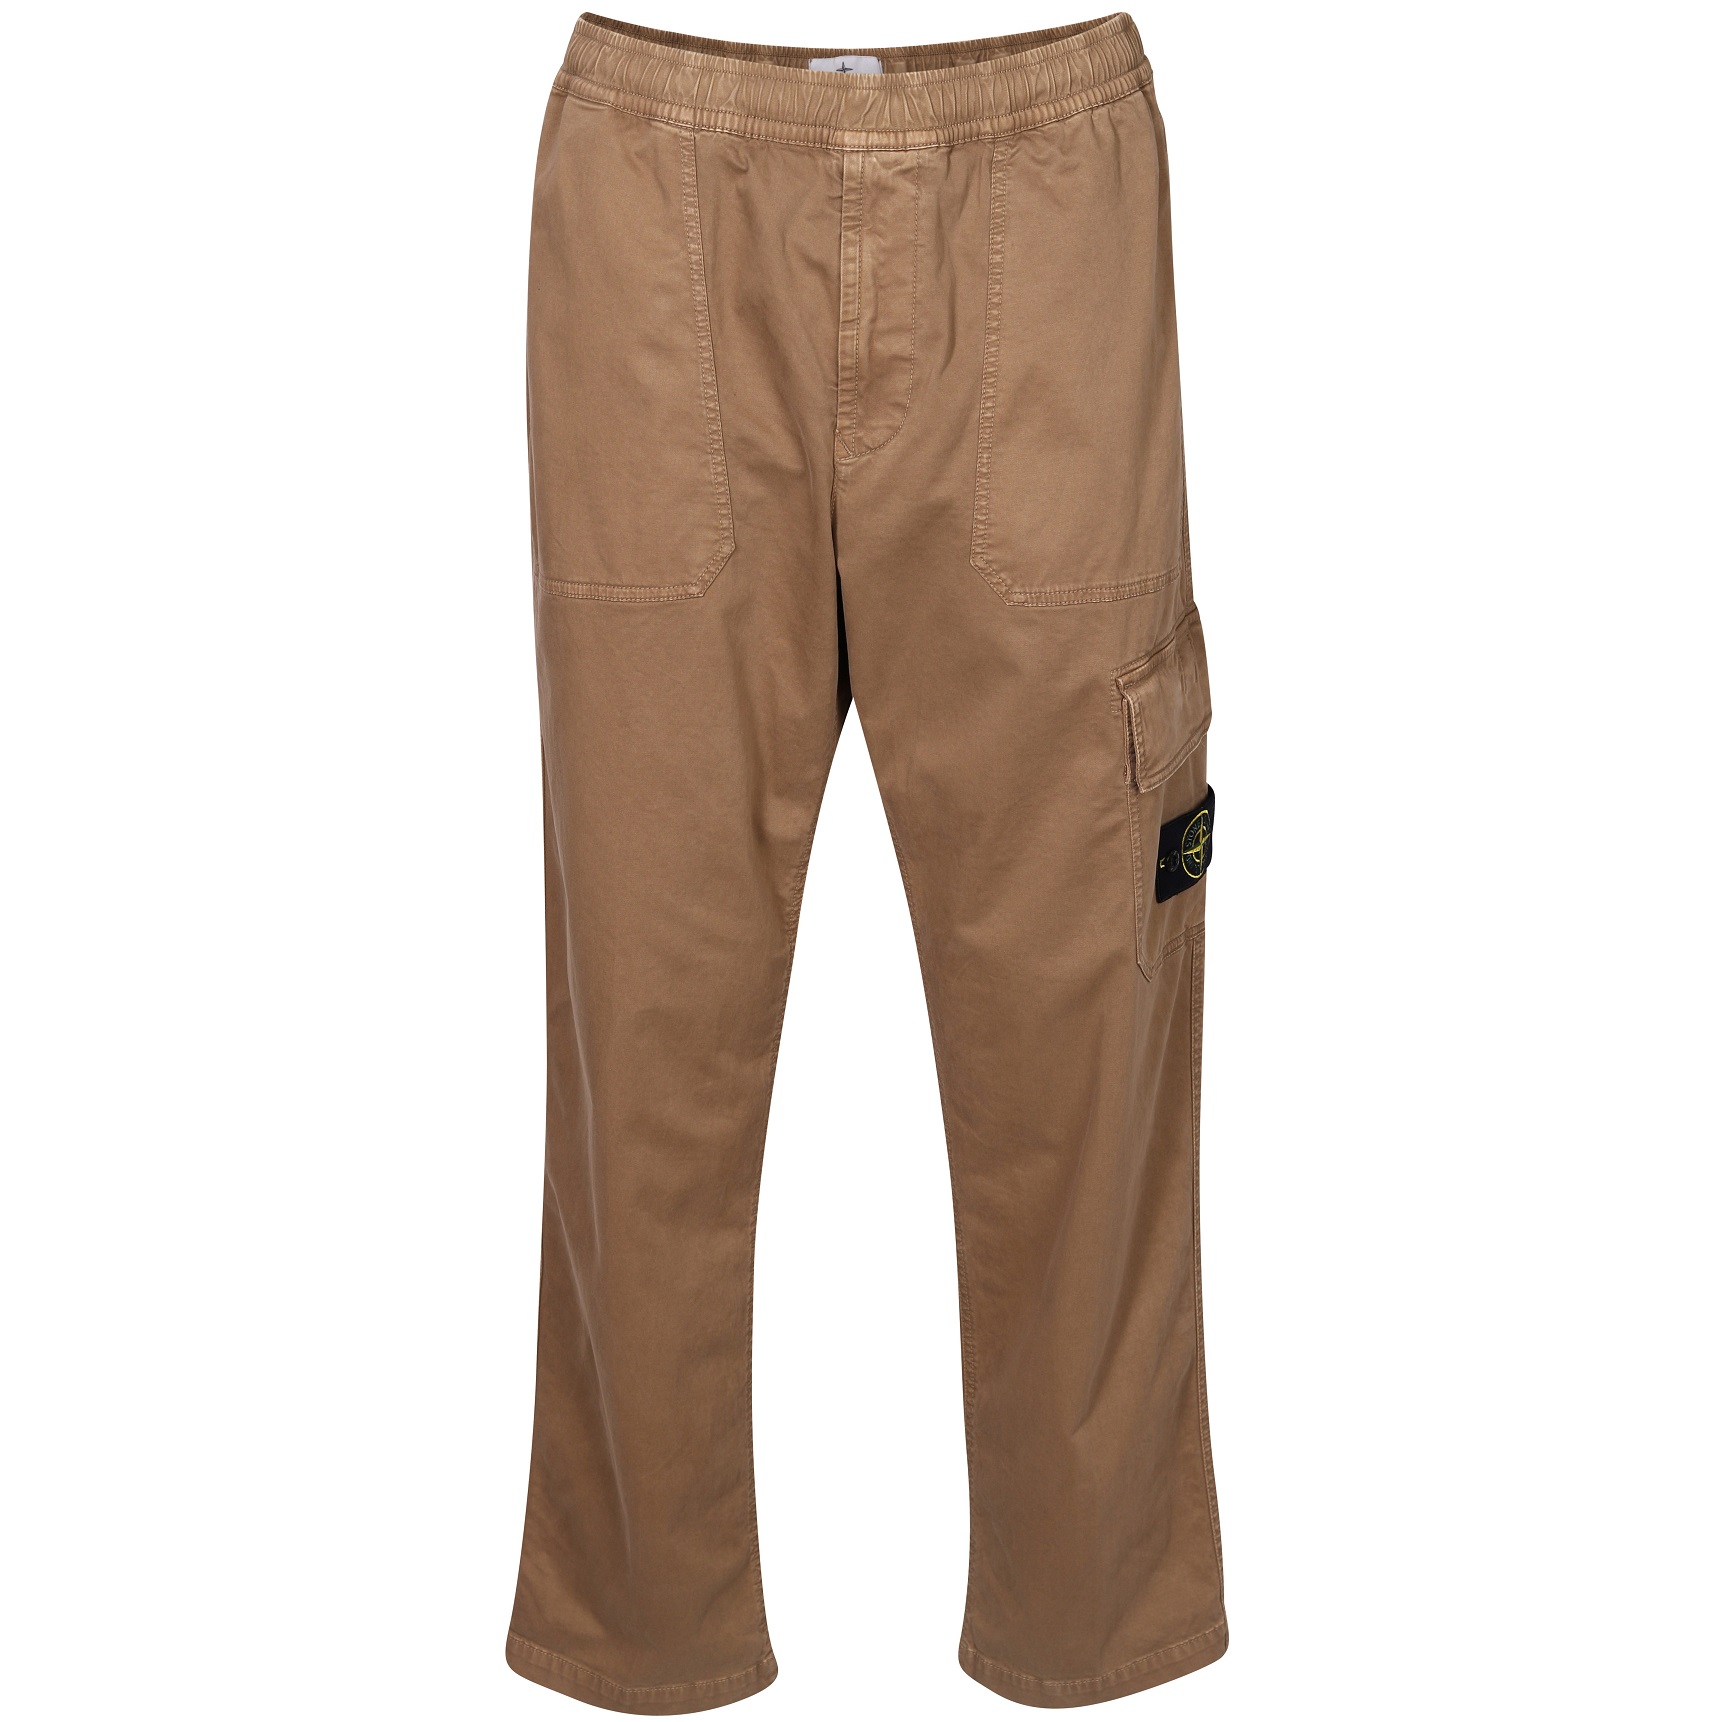 STONE ISLAND Loose Cargo Pant in Washed Dark Beige 30